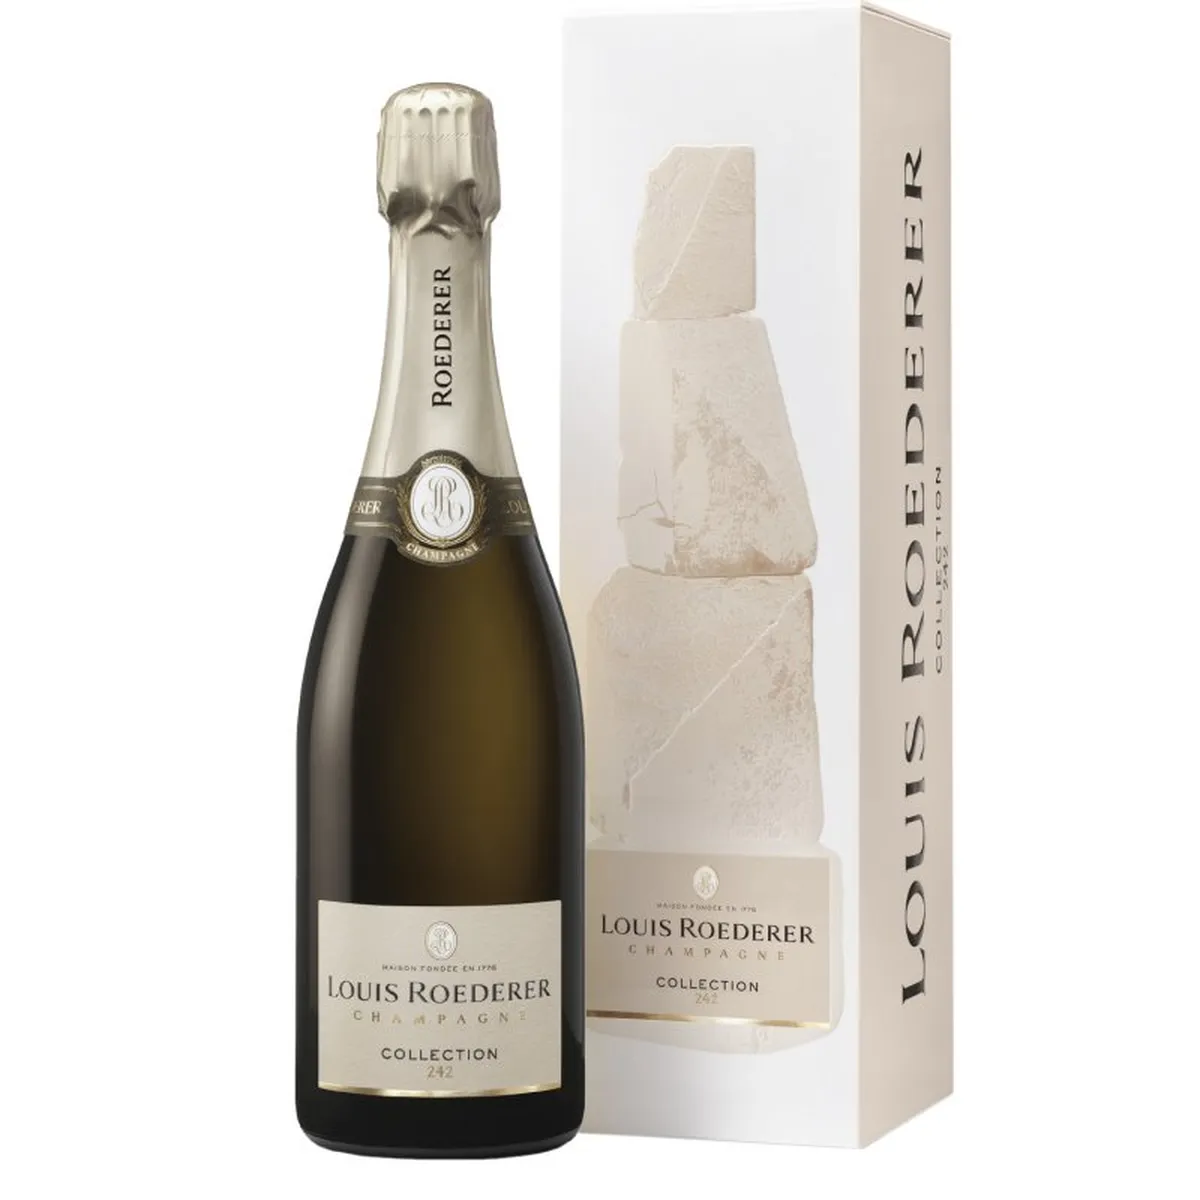 CHAMPAGNE LOUIS ROEDERER COLLECTION 242 MAGNUM